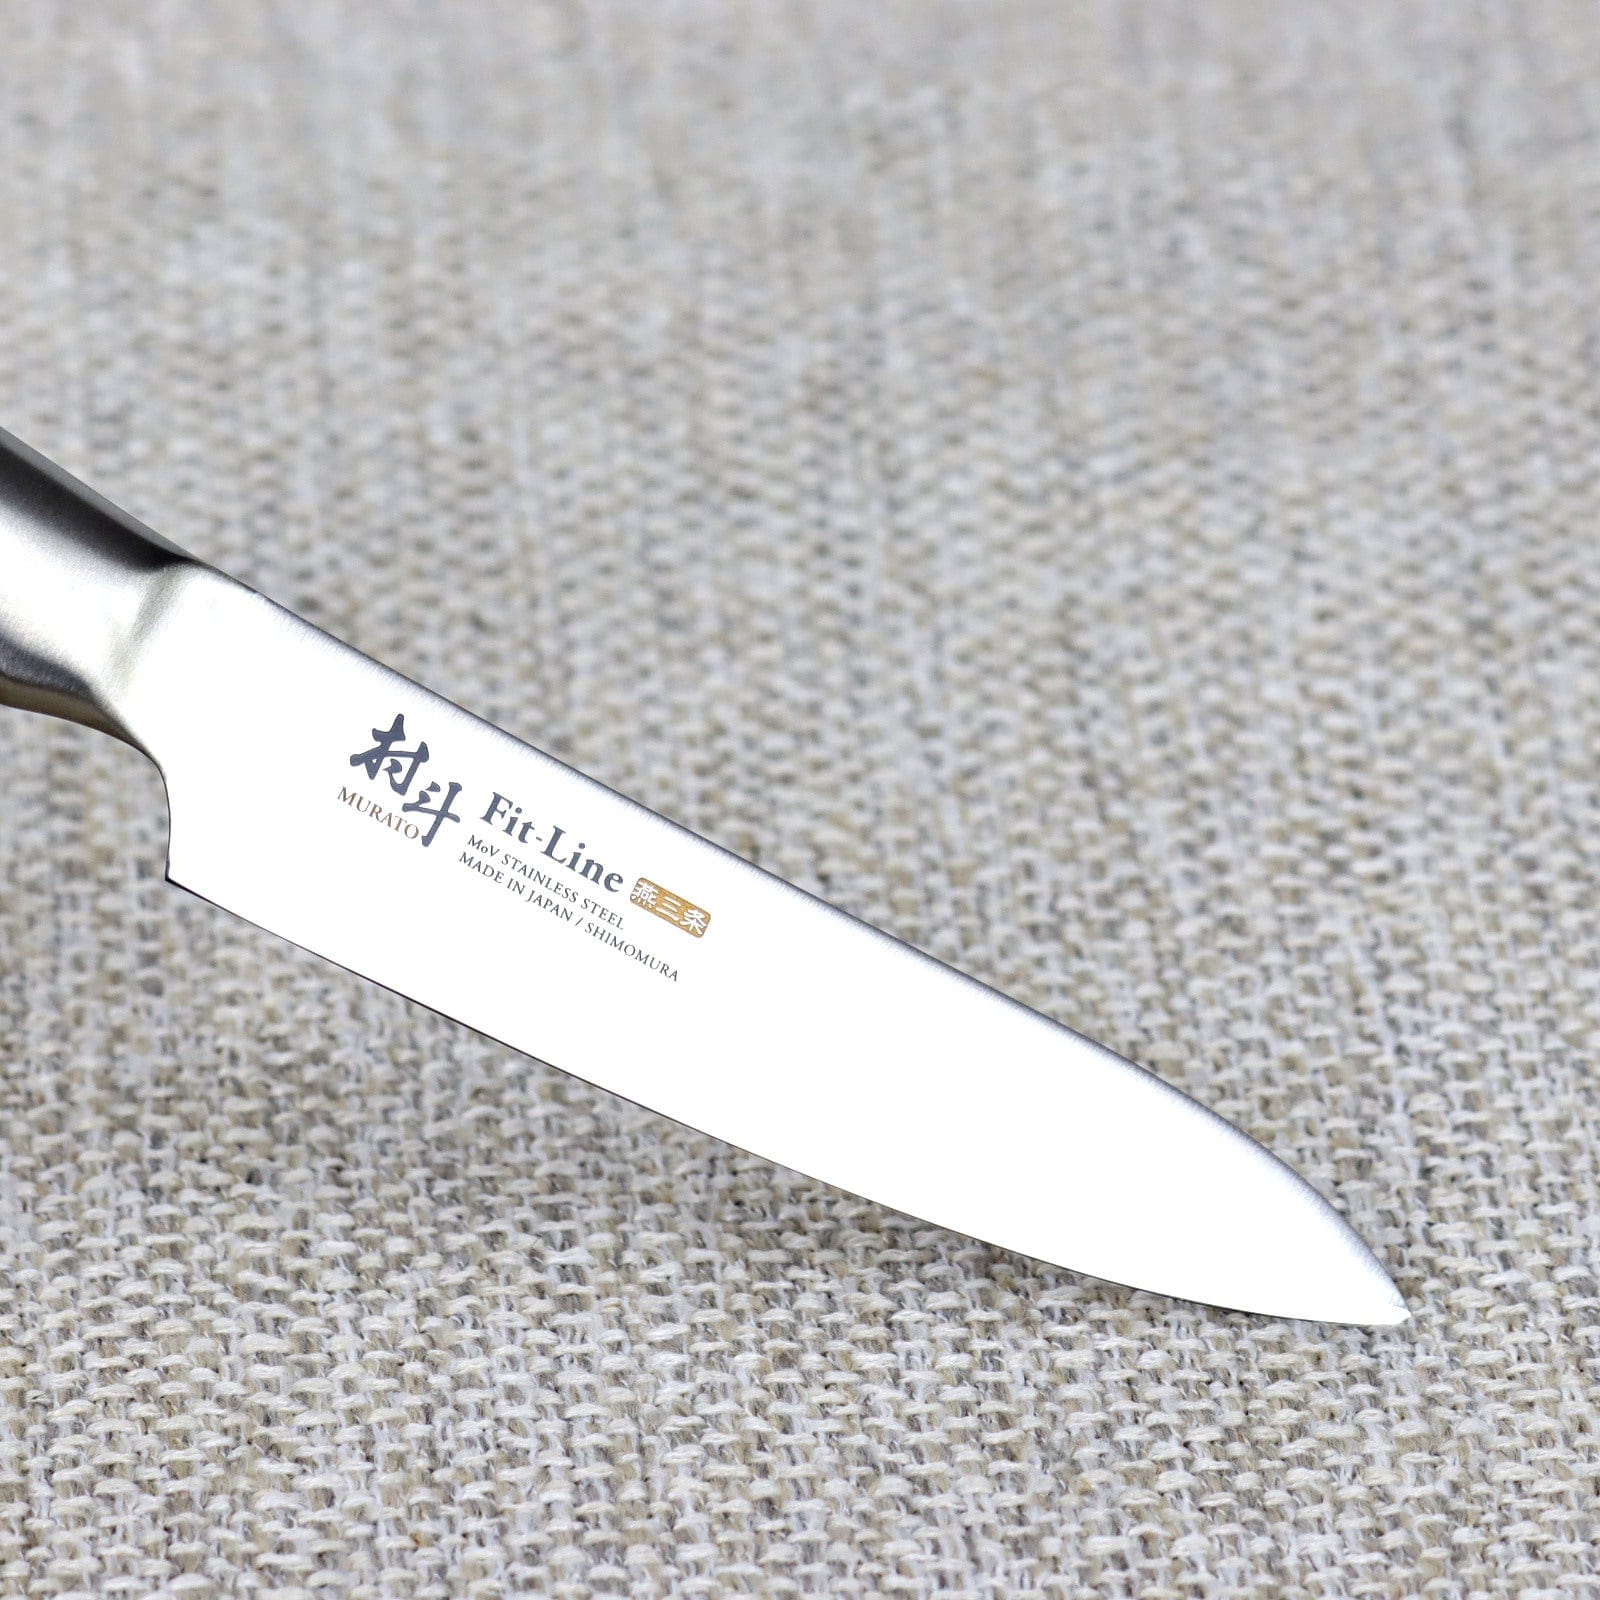 Murato Fit-Line 130mm Petty, Utility, Japanese kitchen knife, closeup of blade